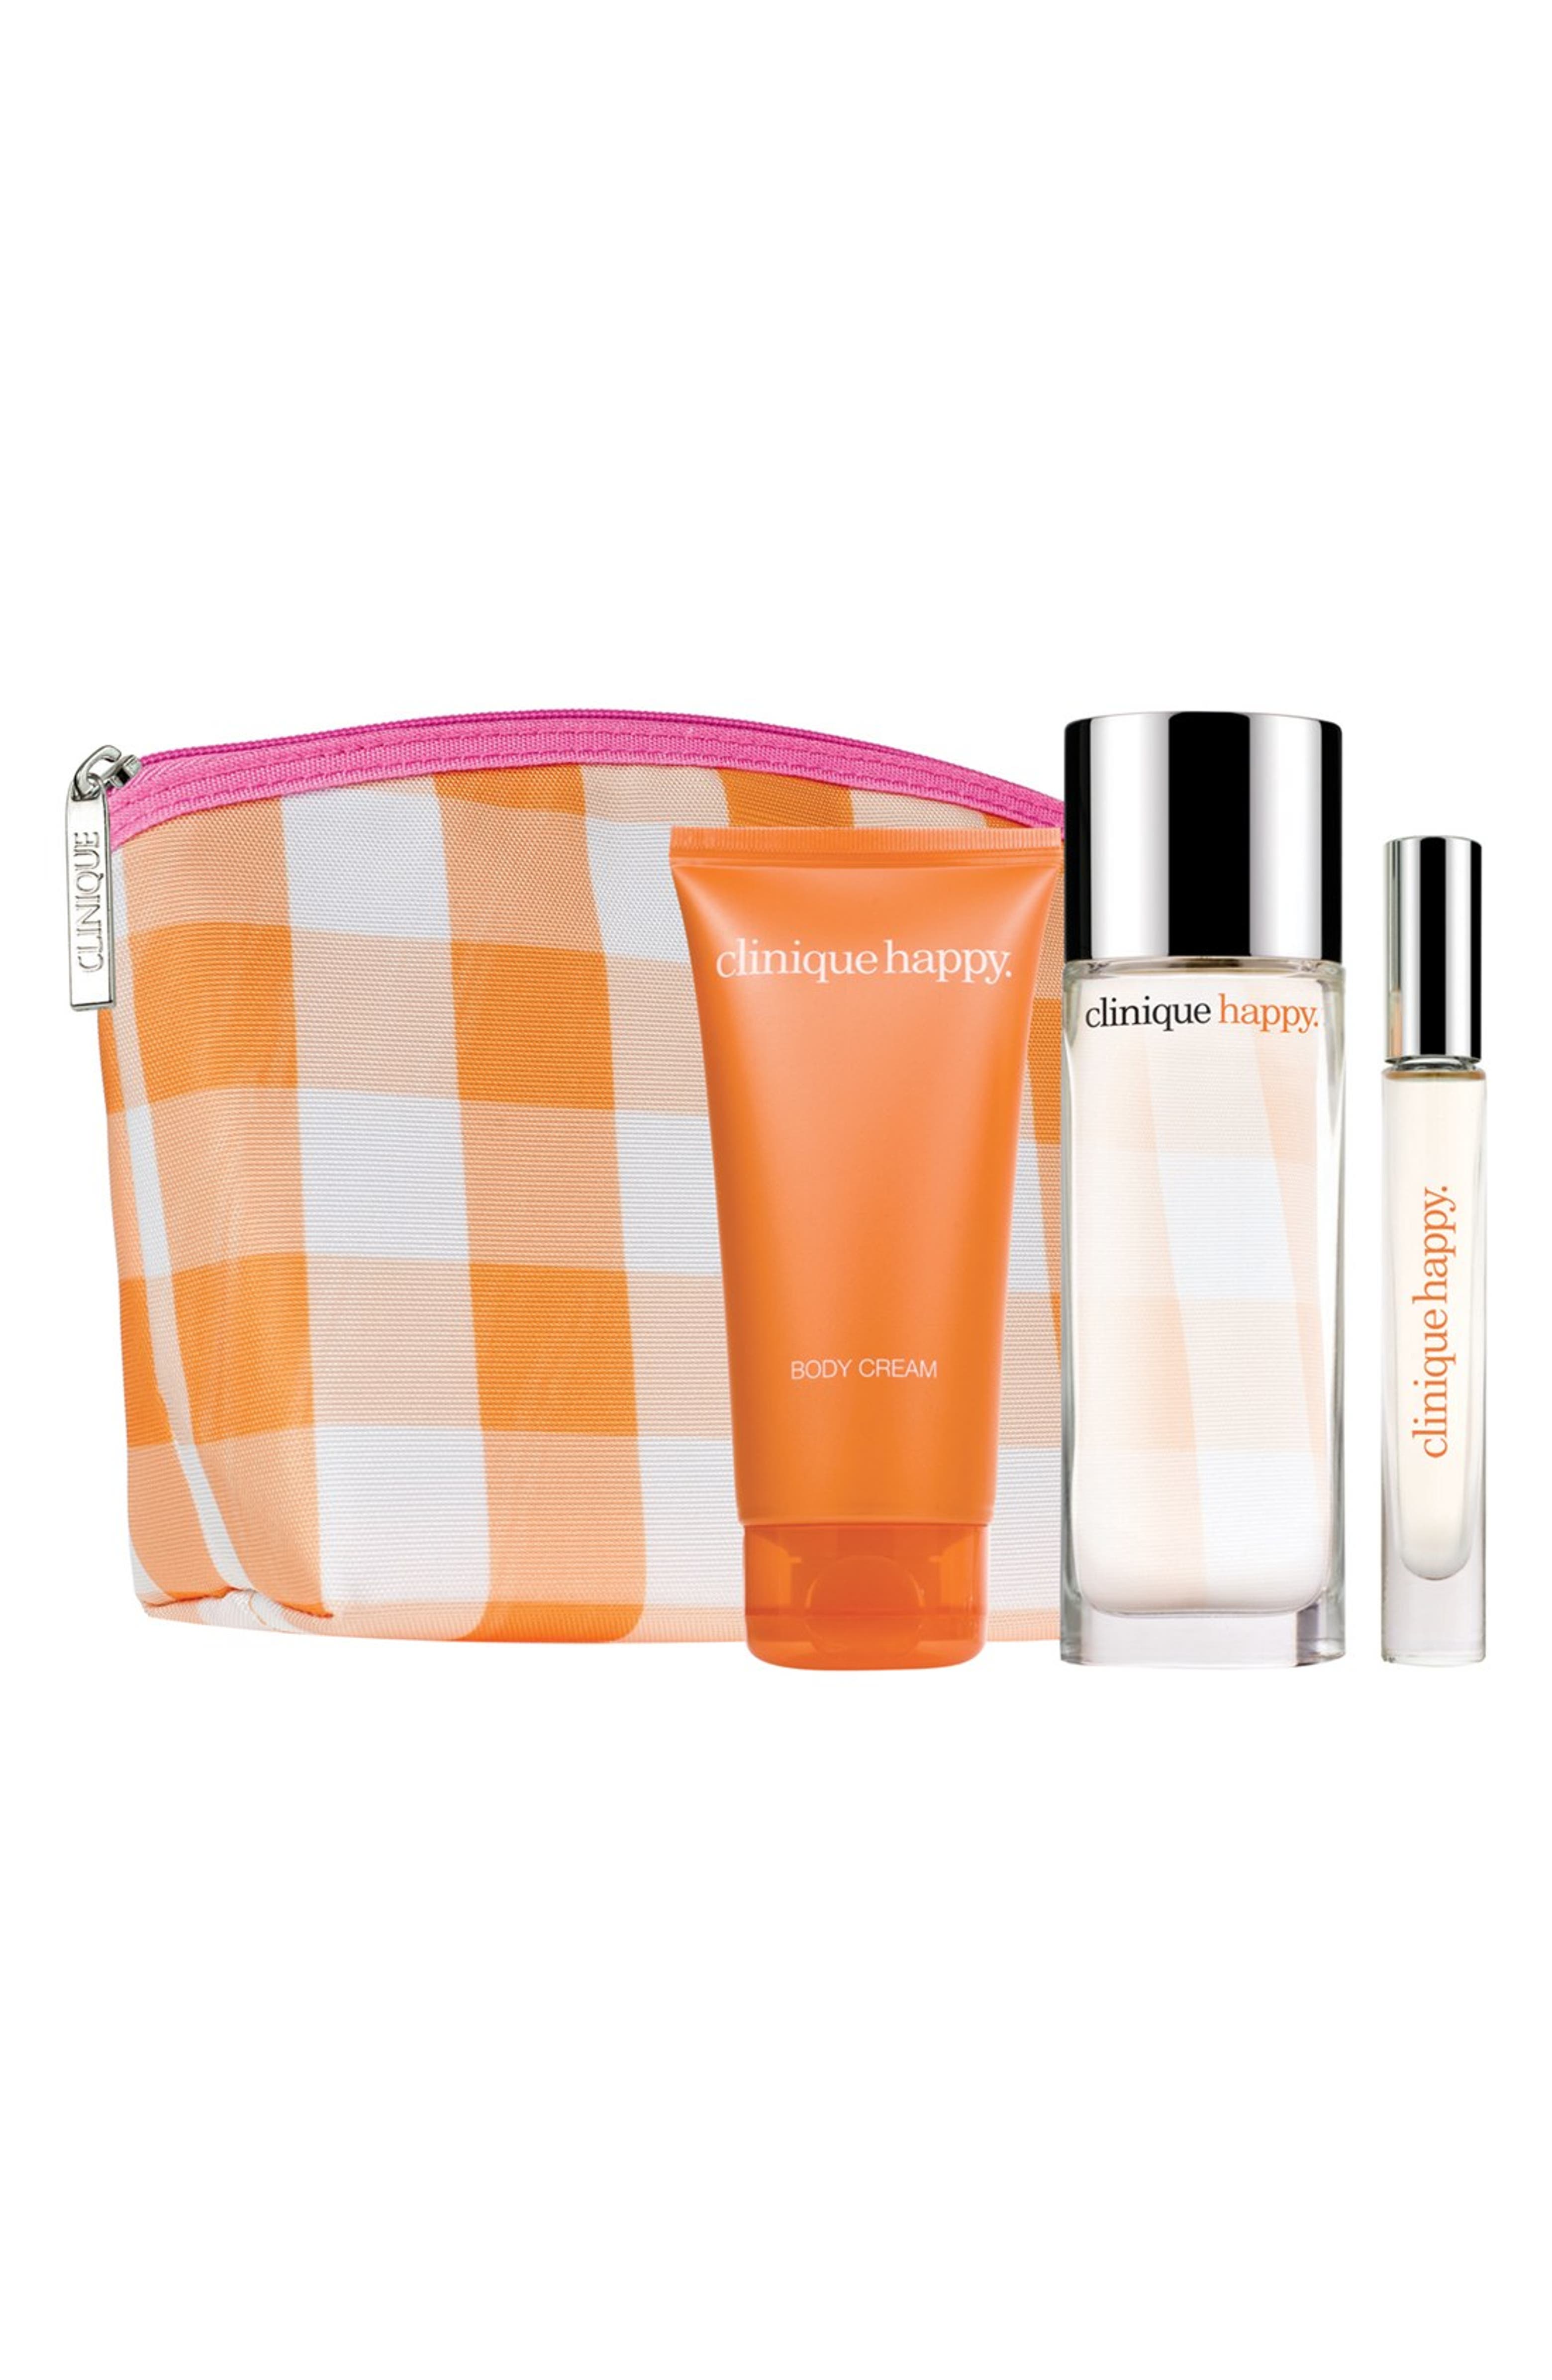 Clinique 'Happy' Gift Set Nordstrom